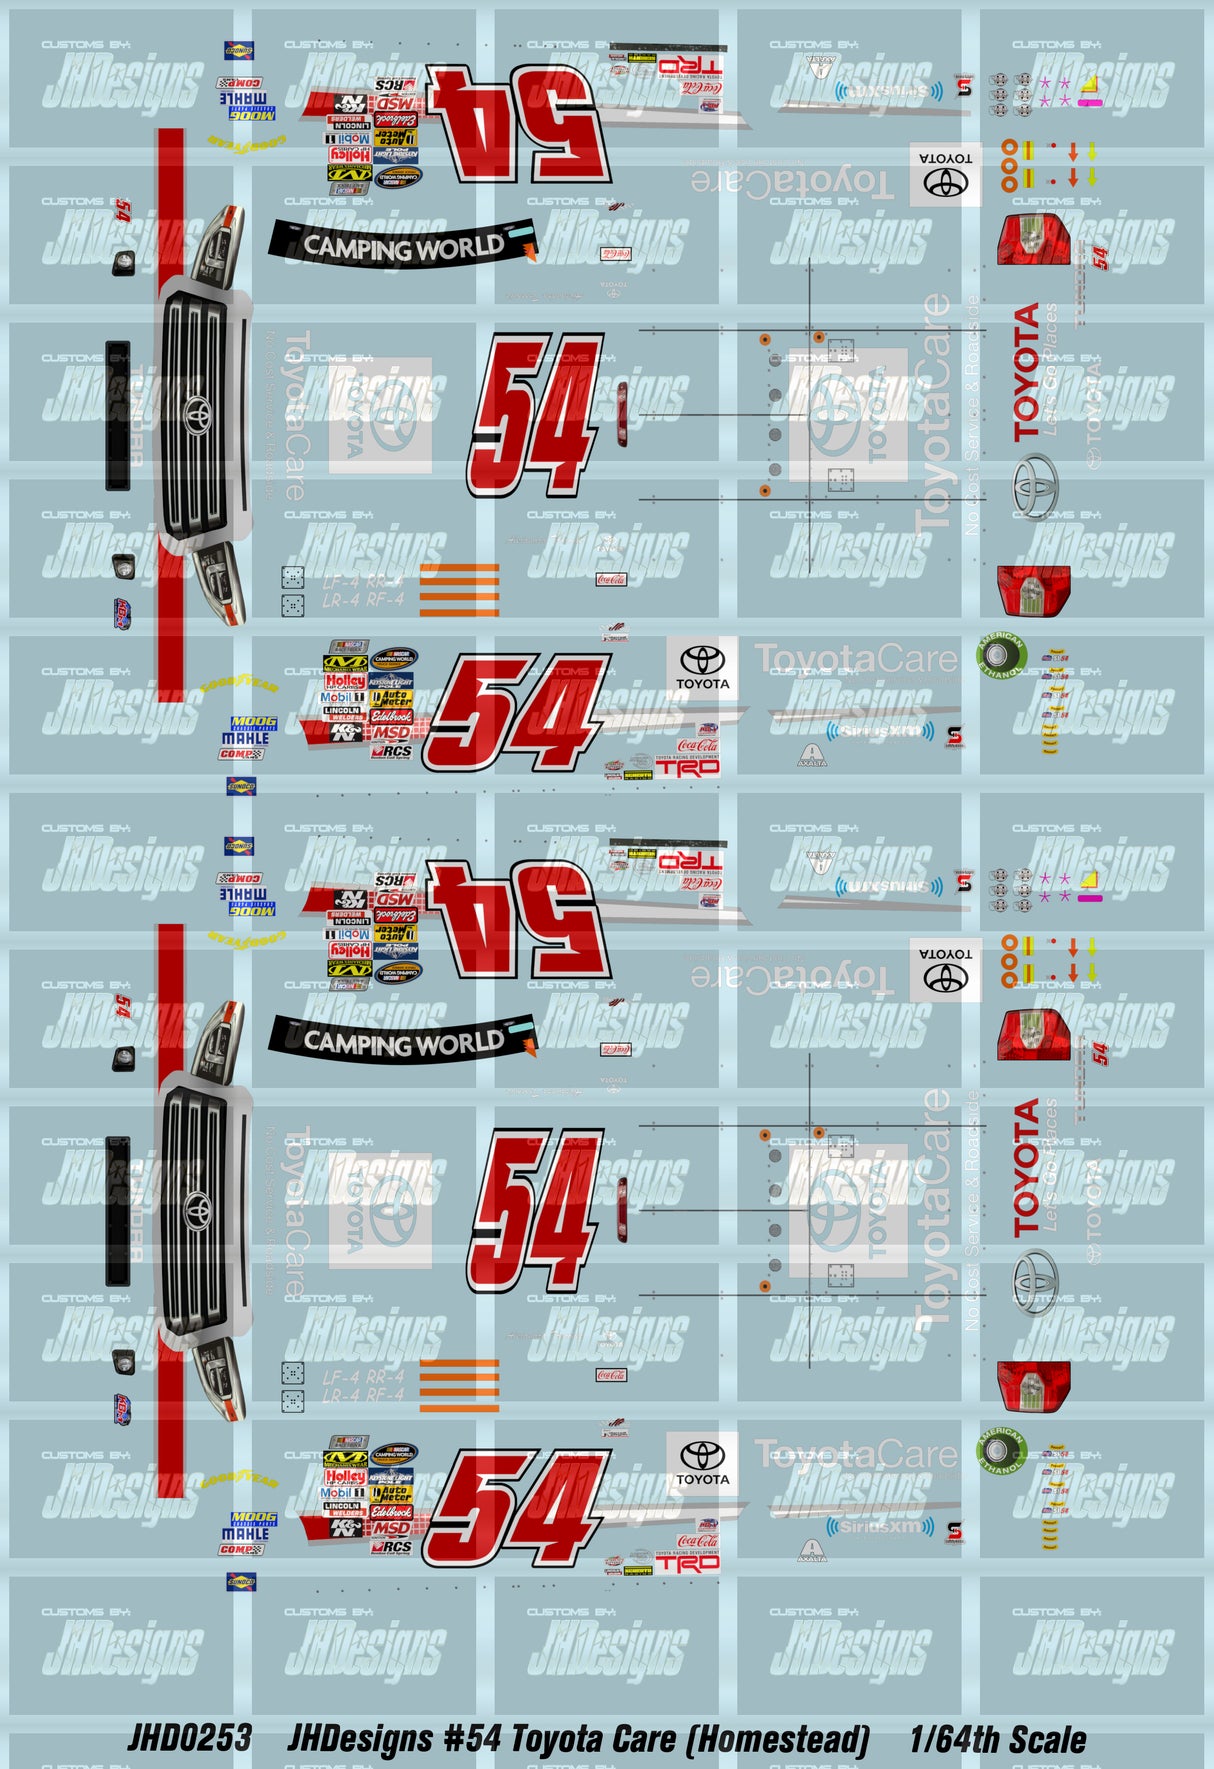 JH Designs Bubba Wallace 2014 CWTS #54 Toyota Care (Homestead Race) 1:64 Racecar Decal Set